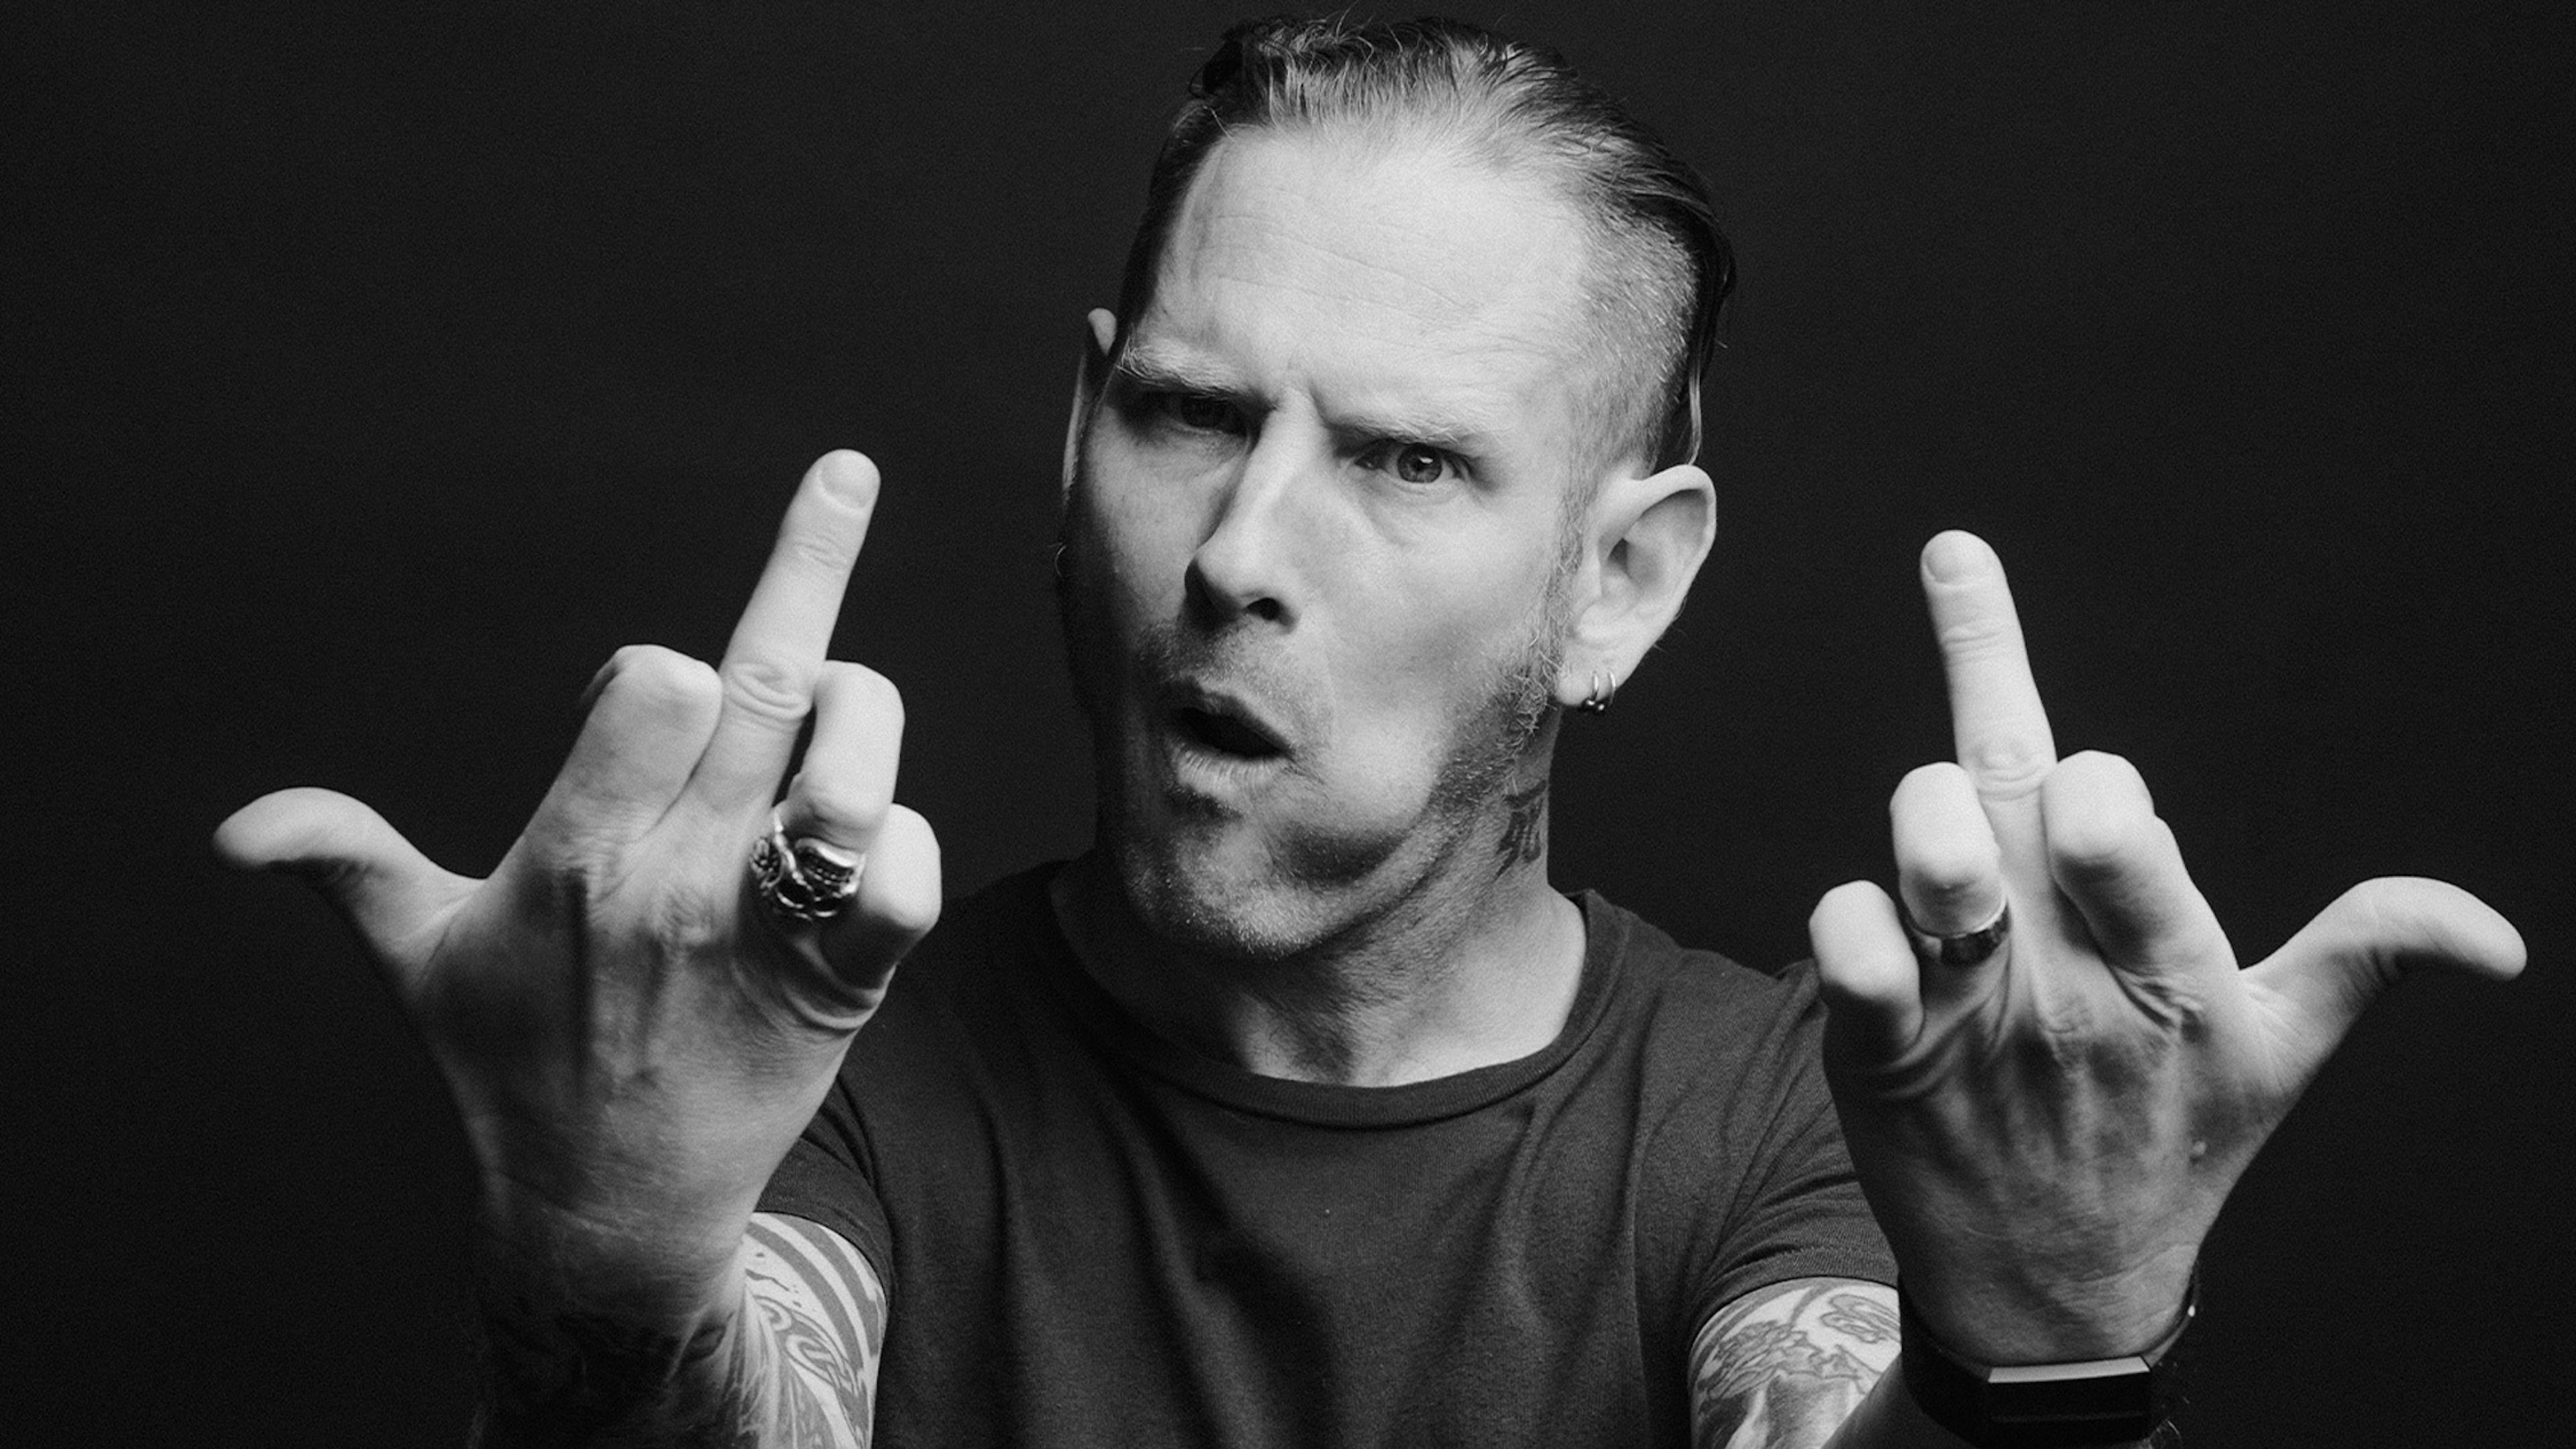 Corey Taylor: “Lars Ulrich was right about Napster”